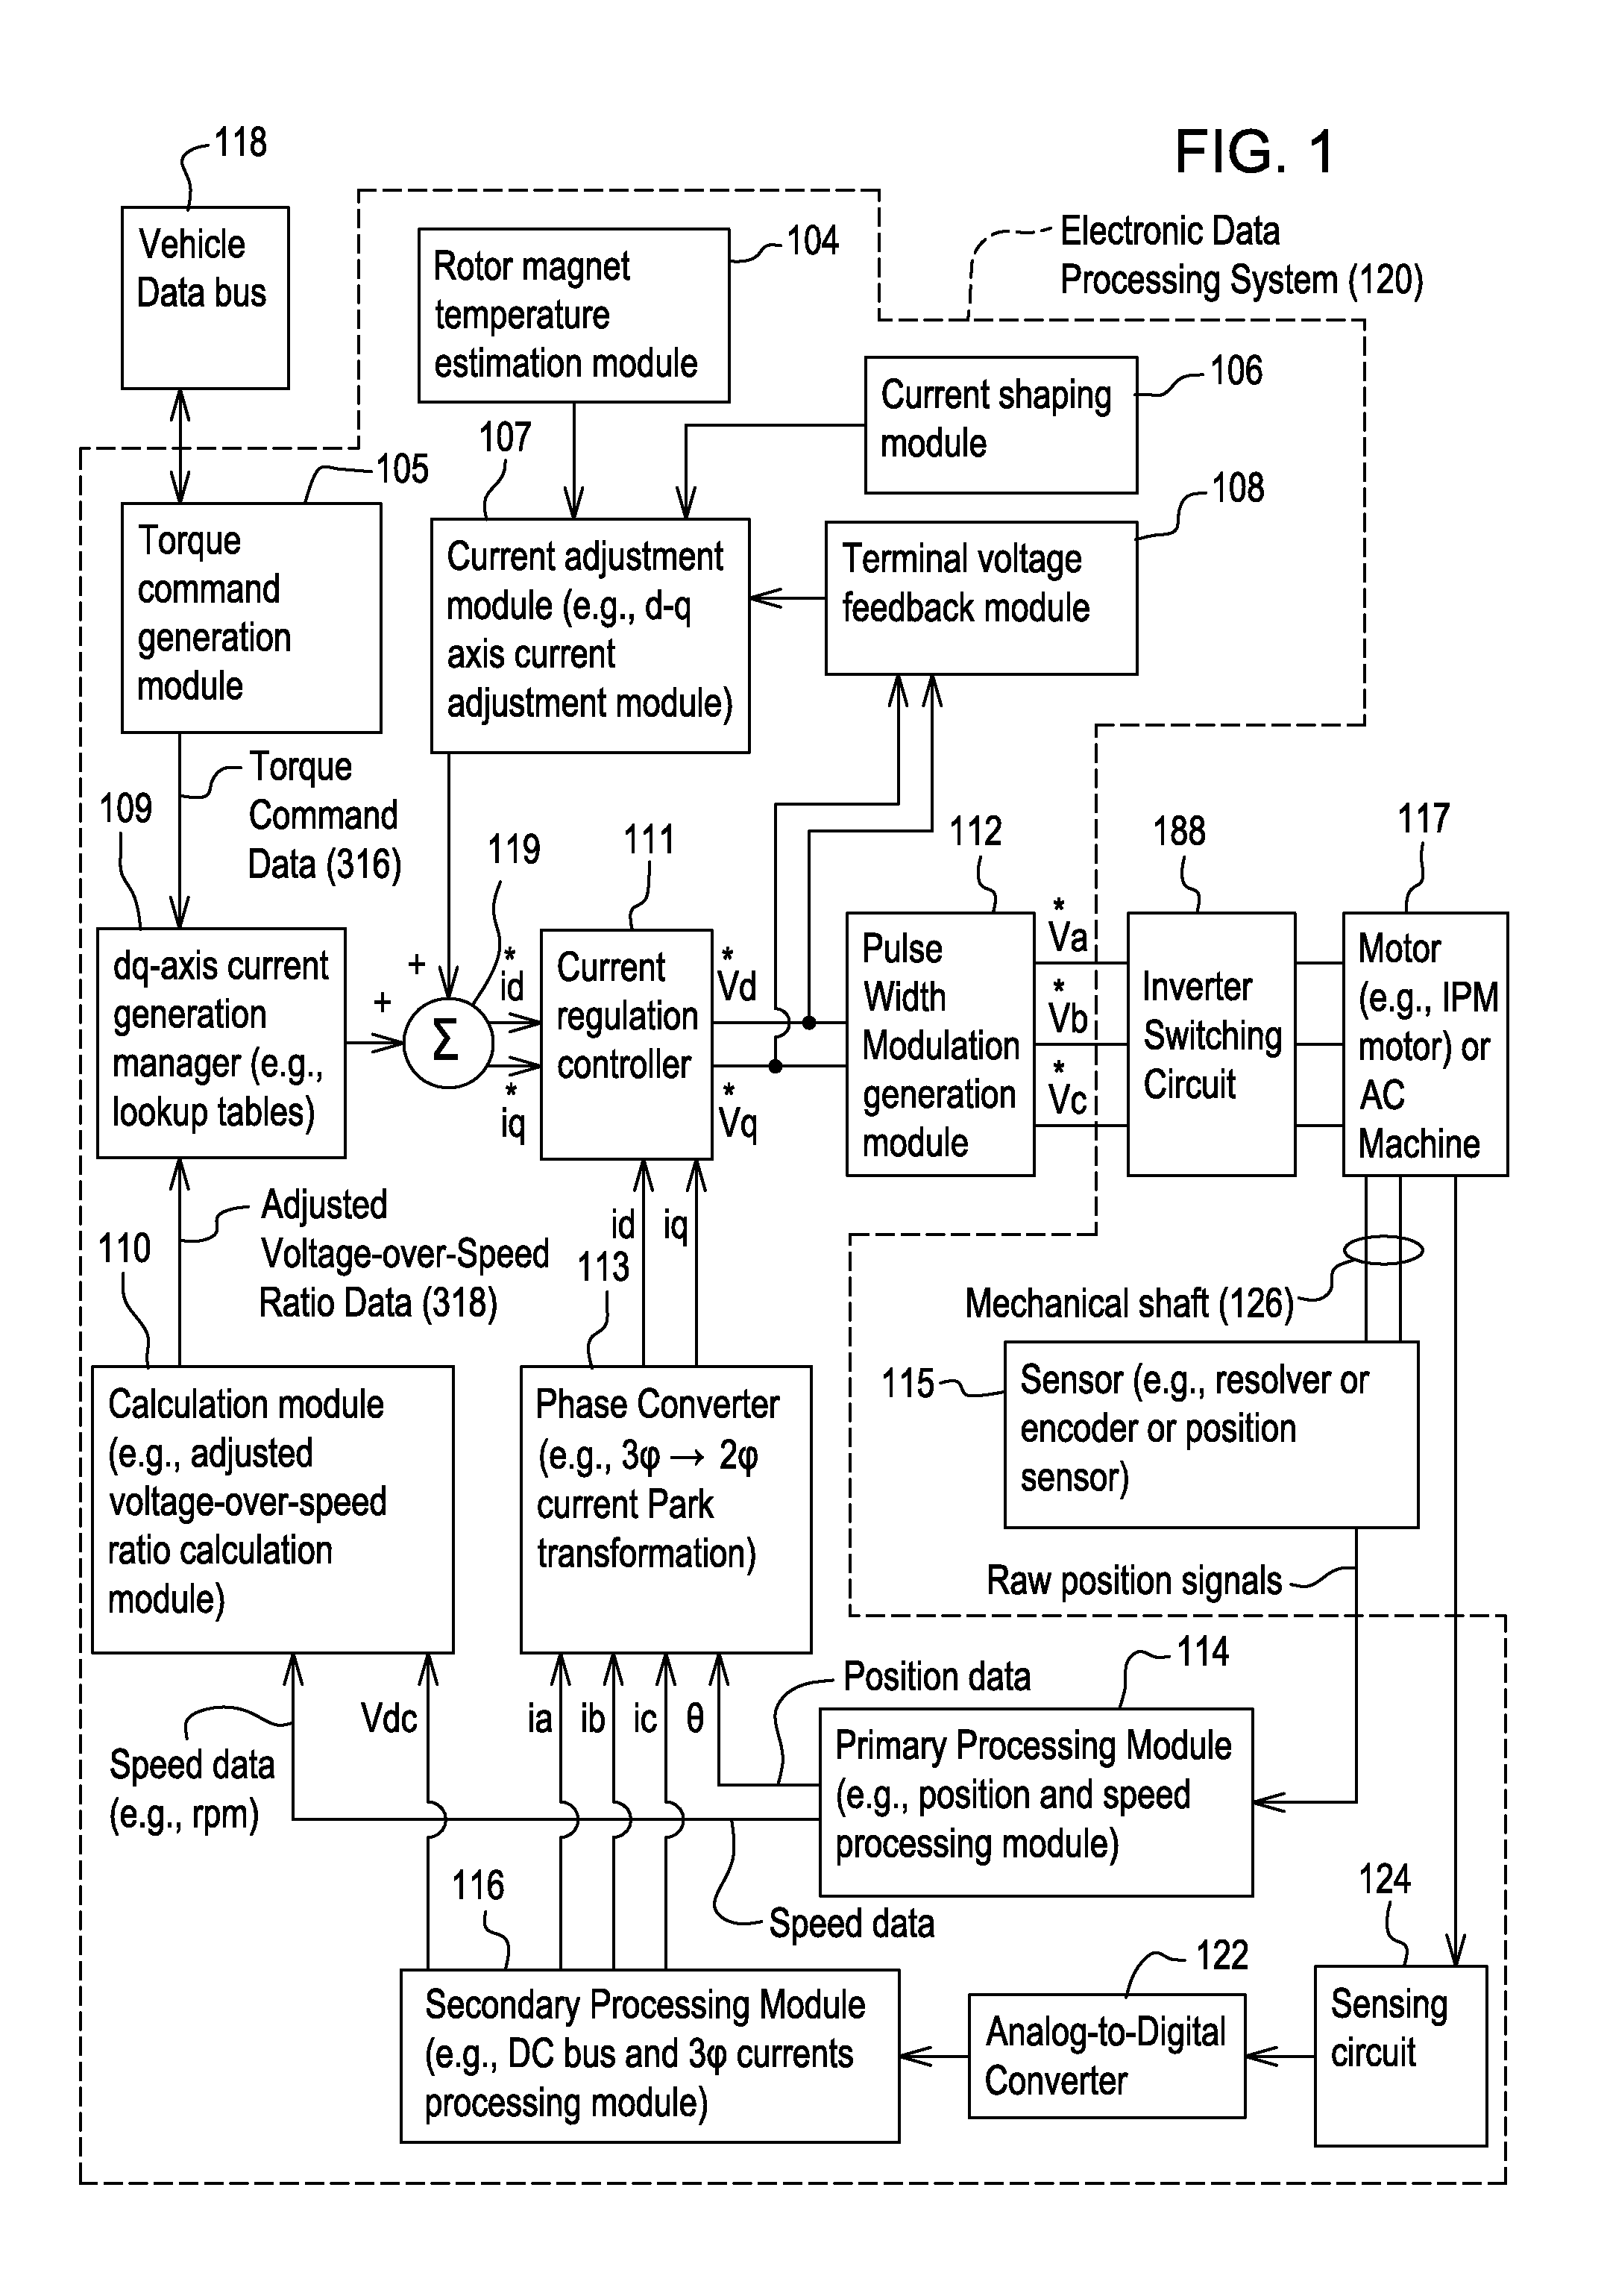 Method and system for evaluating electrical connections between an motor controller and motor